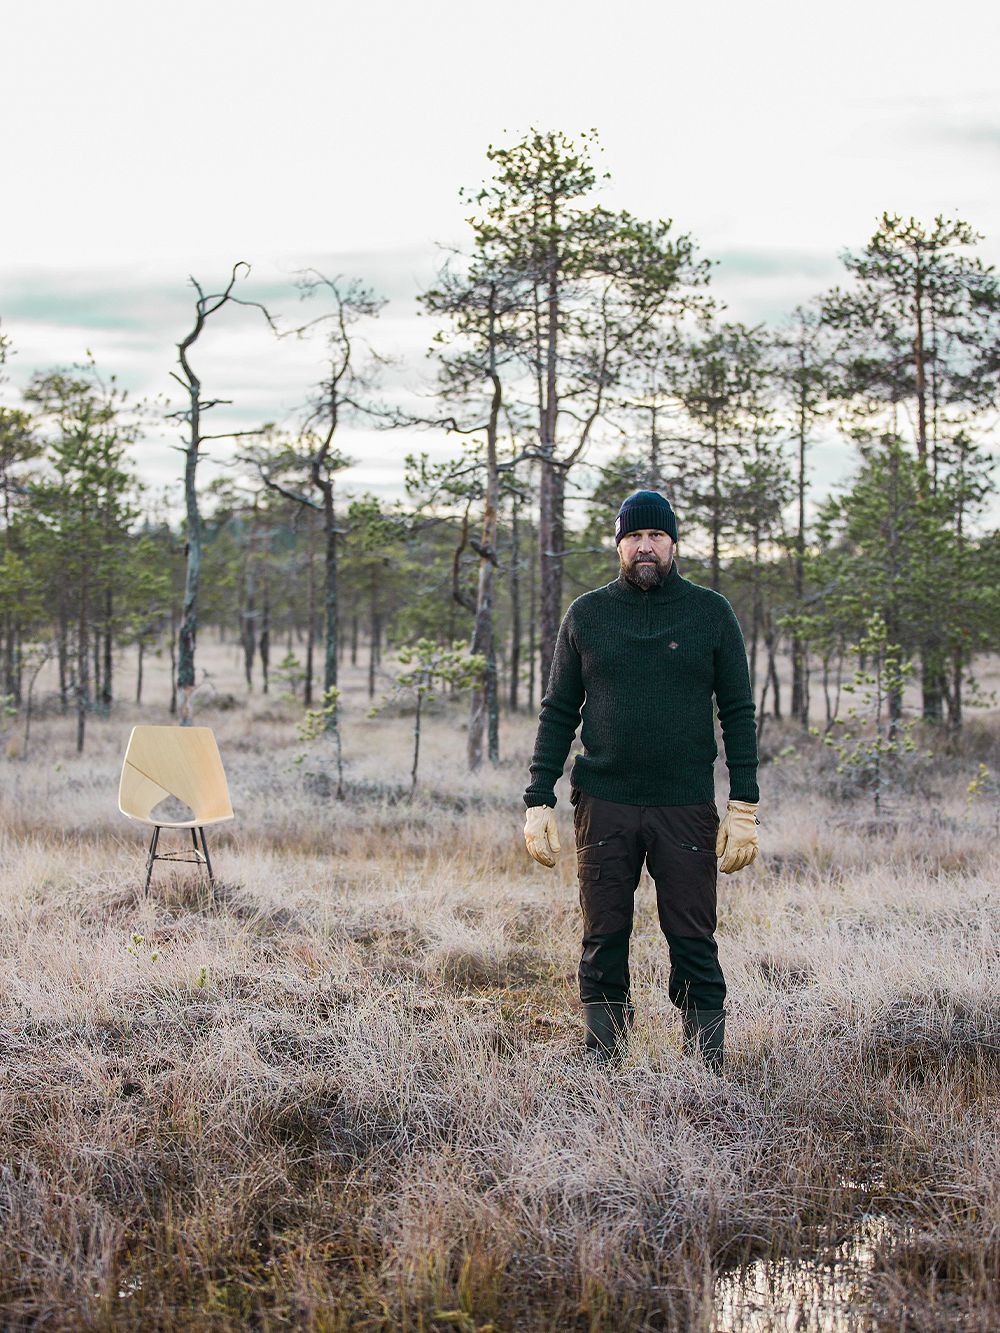 Designer Tapio Anttila standing in a forest dressed in black with the Limi chair in the background.